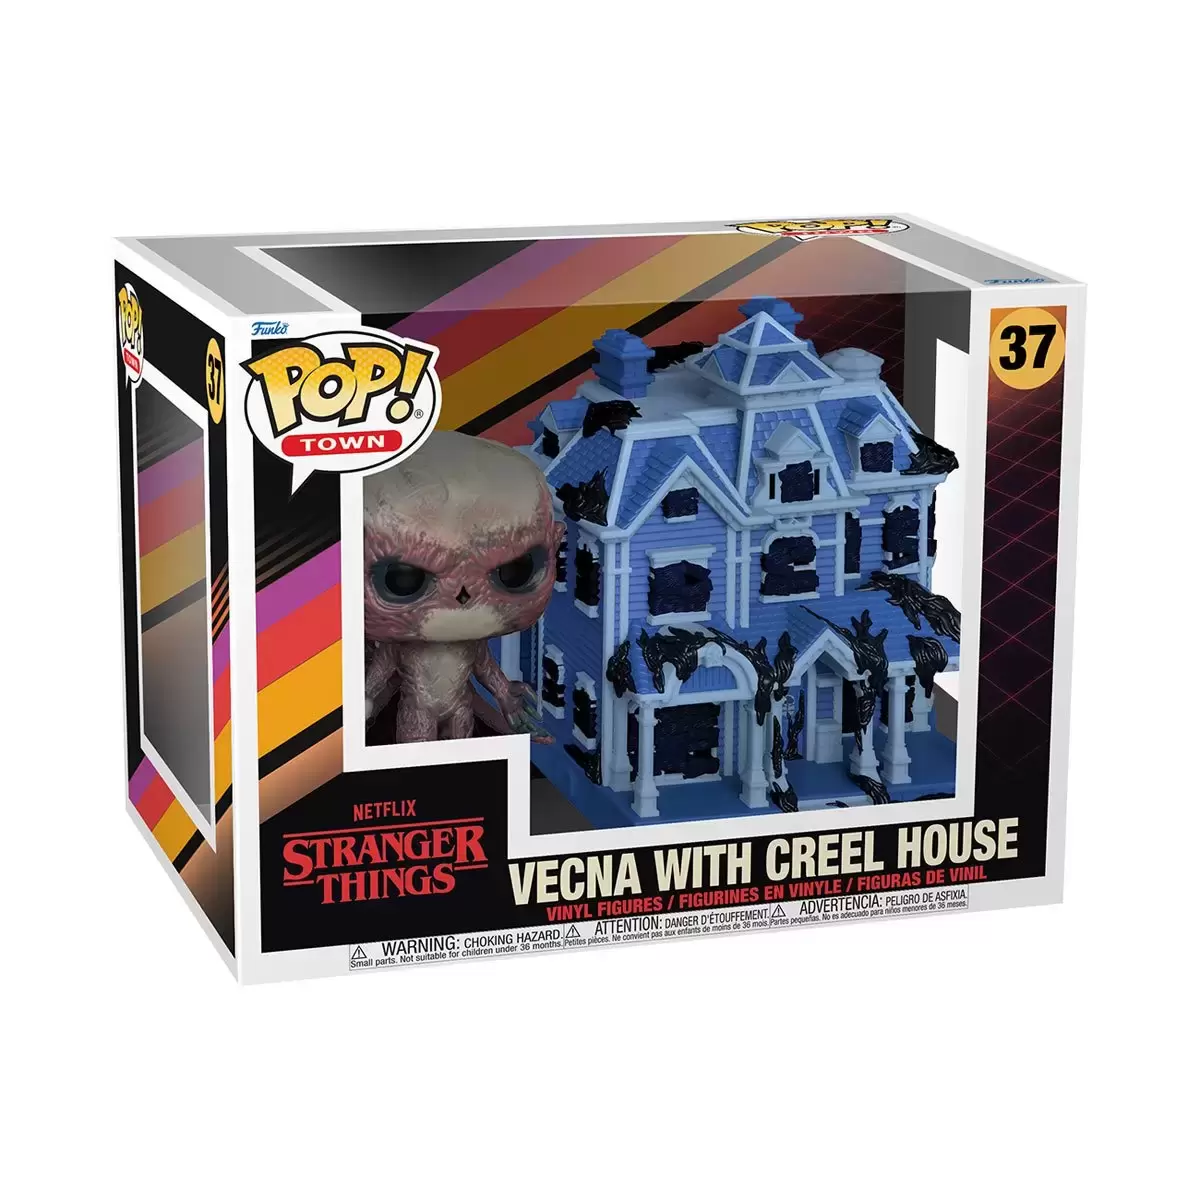 POP! Town - Stranger Things - Vecna With Creel House